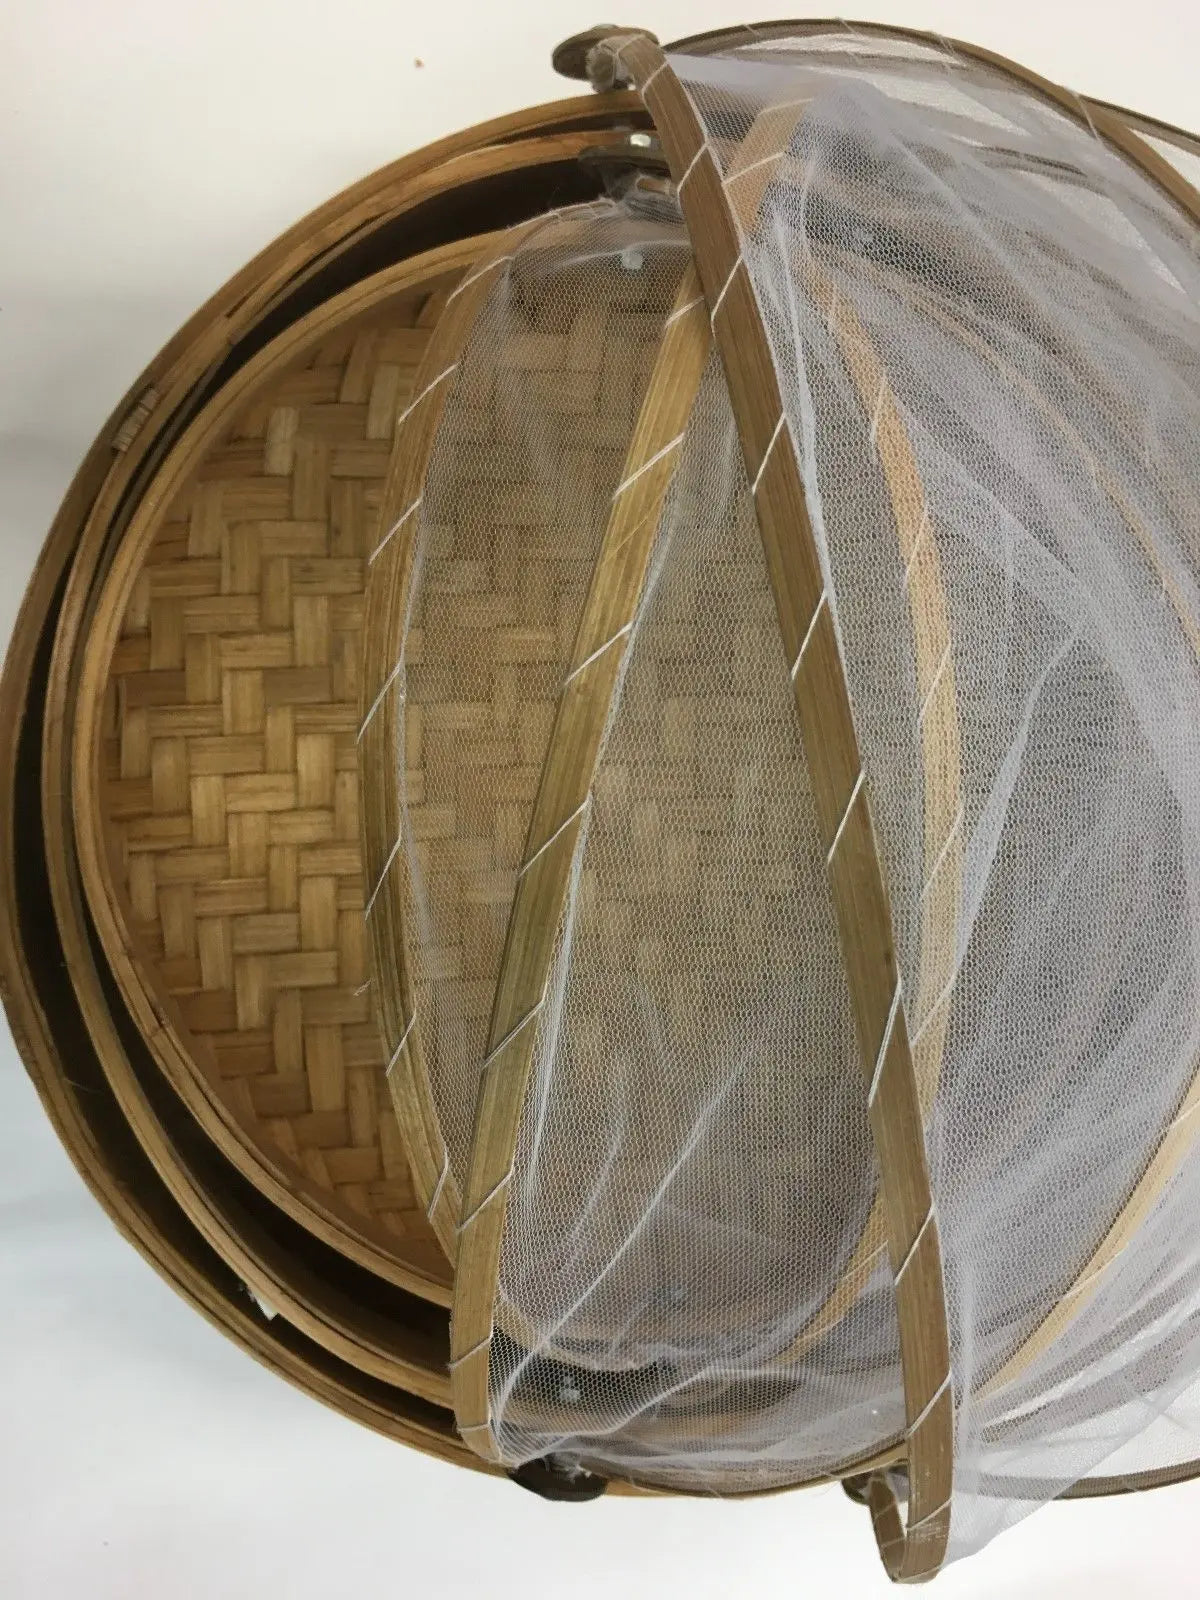 bamboo net basket set of 3 (S+M+L)  picnic gift basket keep out insects storage Everythingbamboo